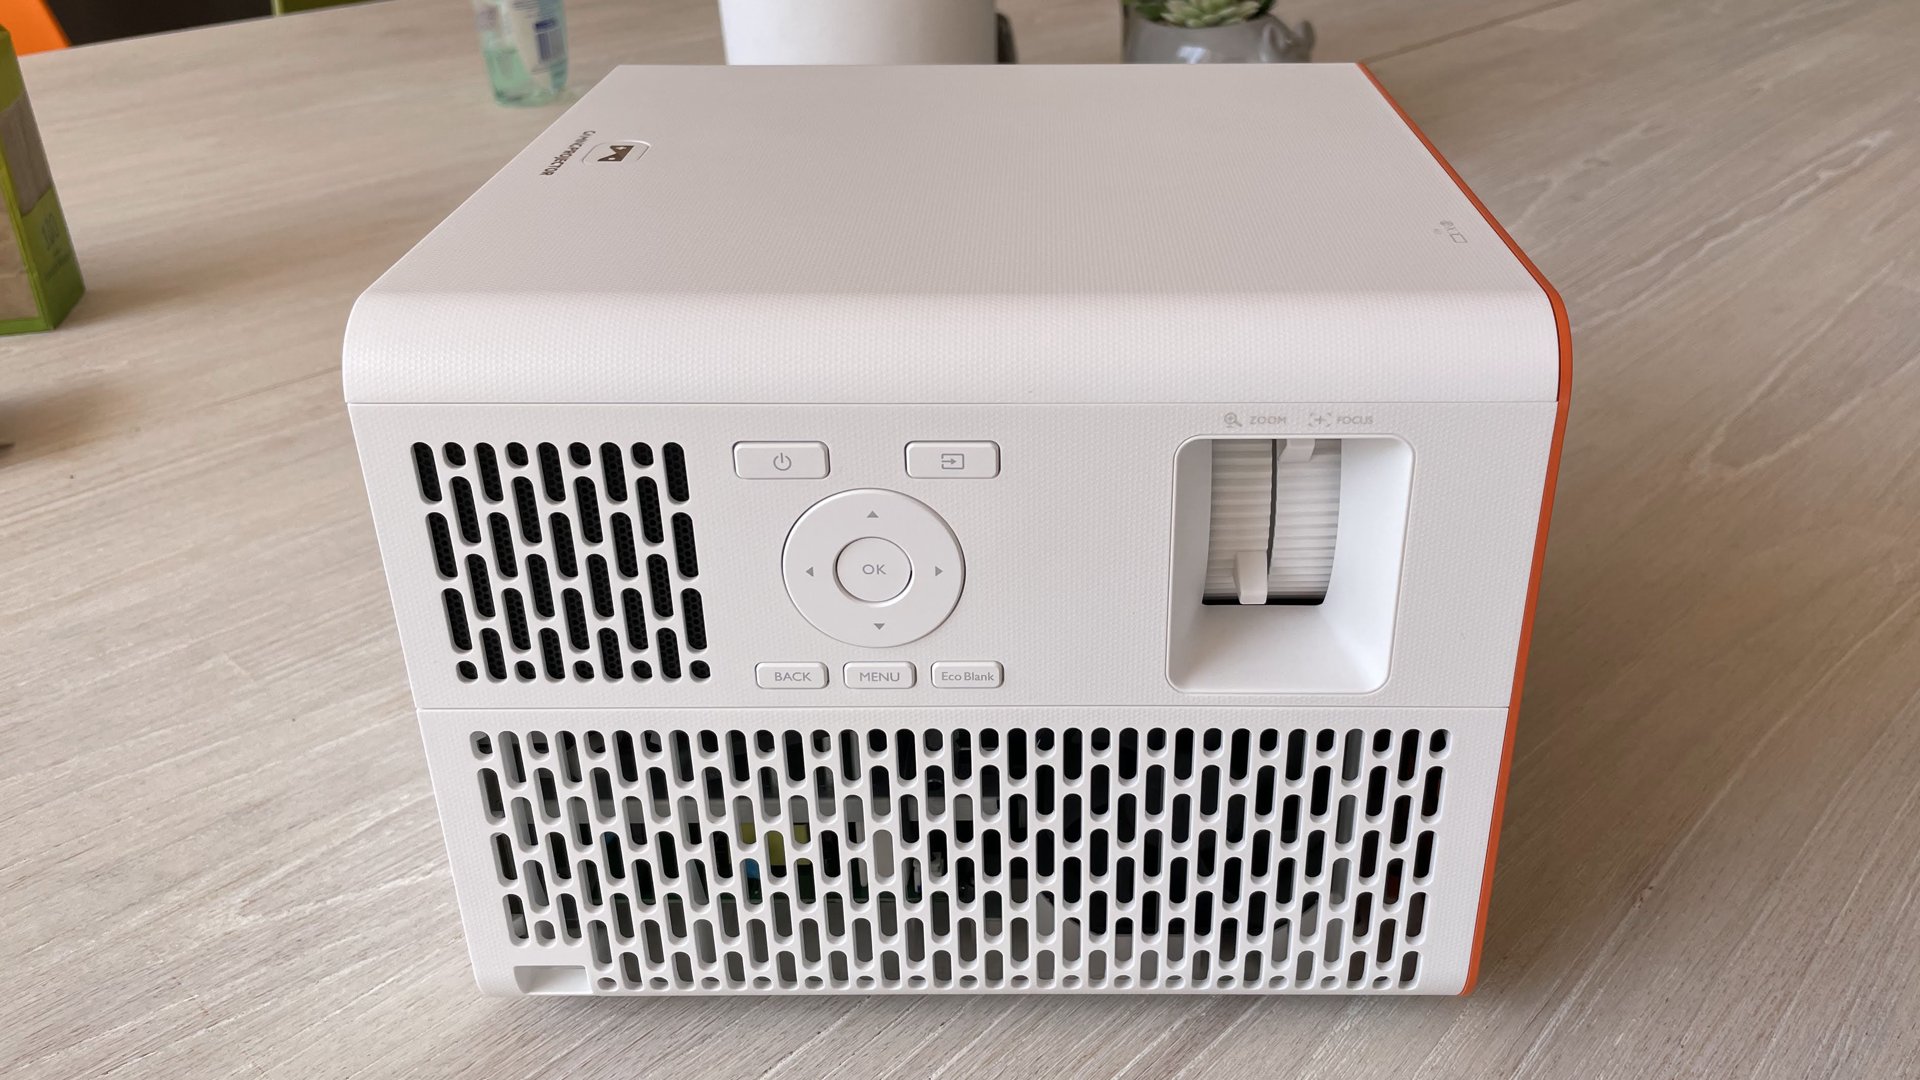 The side controls and grilles of the BenQ X3000i gaming projector